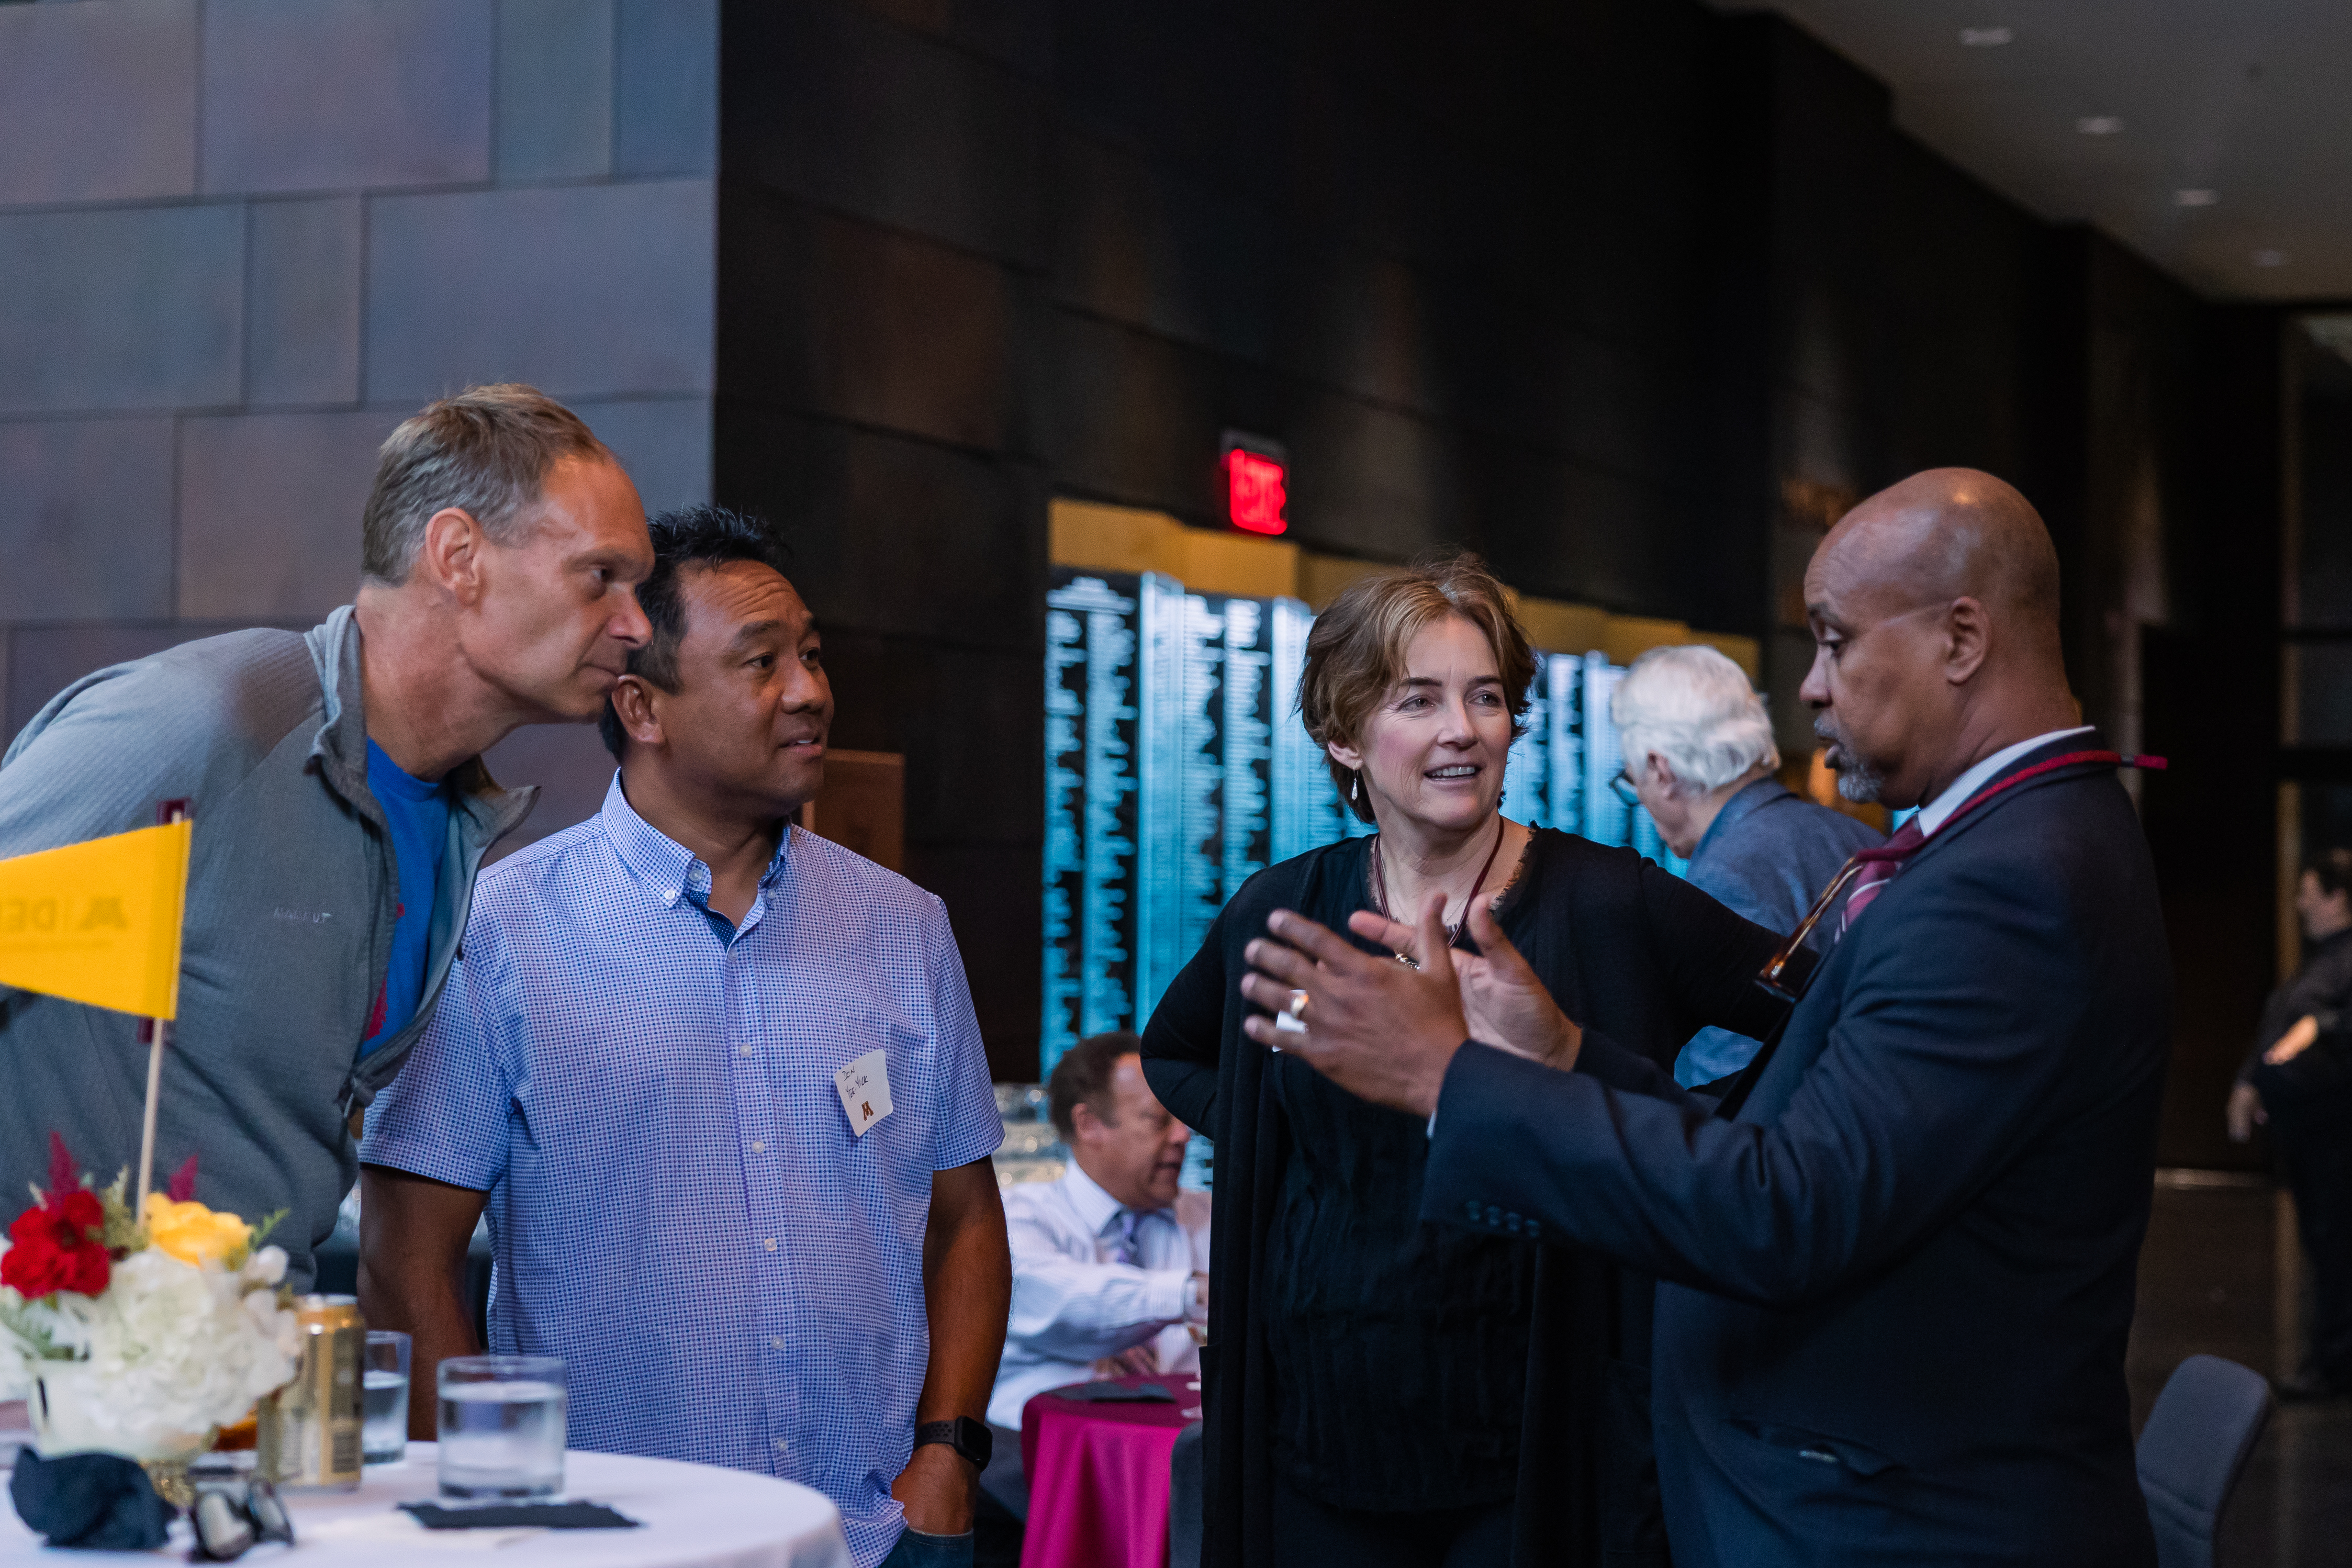 Members of the Class of 1995 speak with Dean Mays